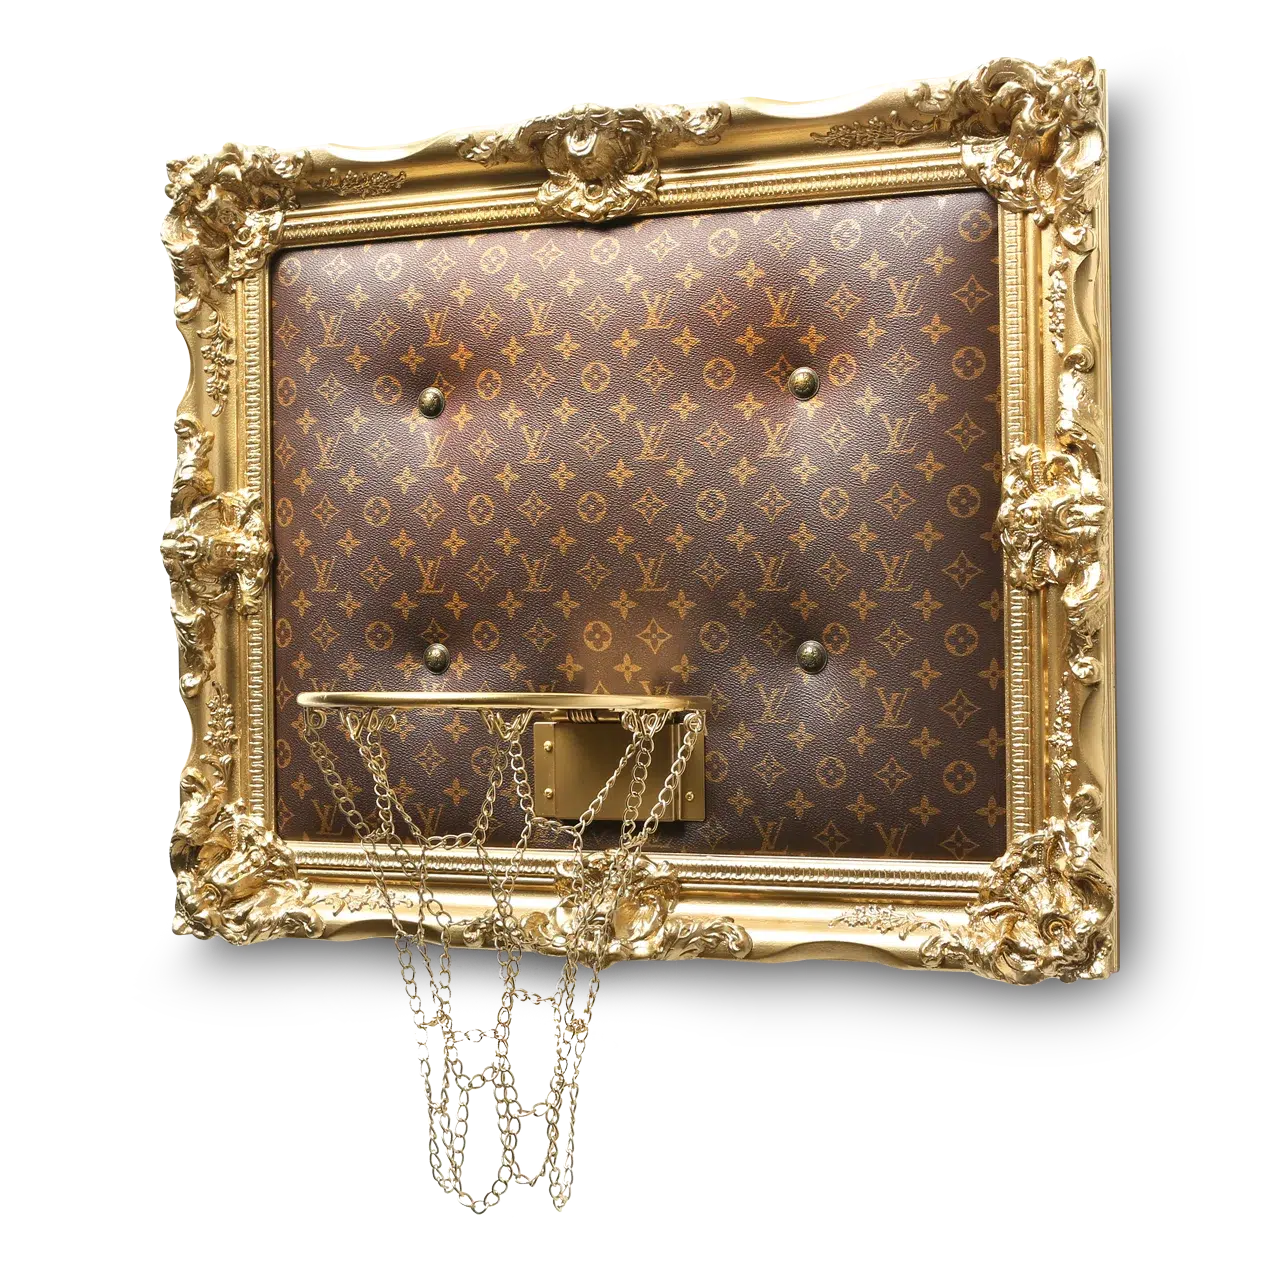 Fashionable Louis Vuitton accessory - the Hoop.